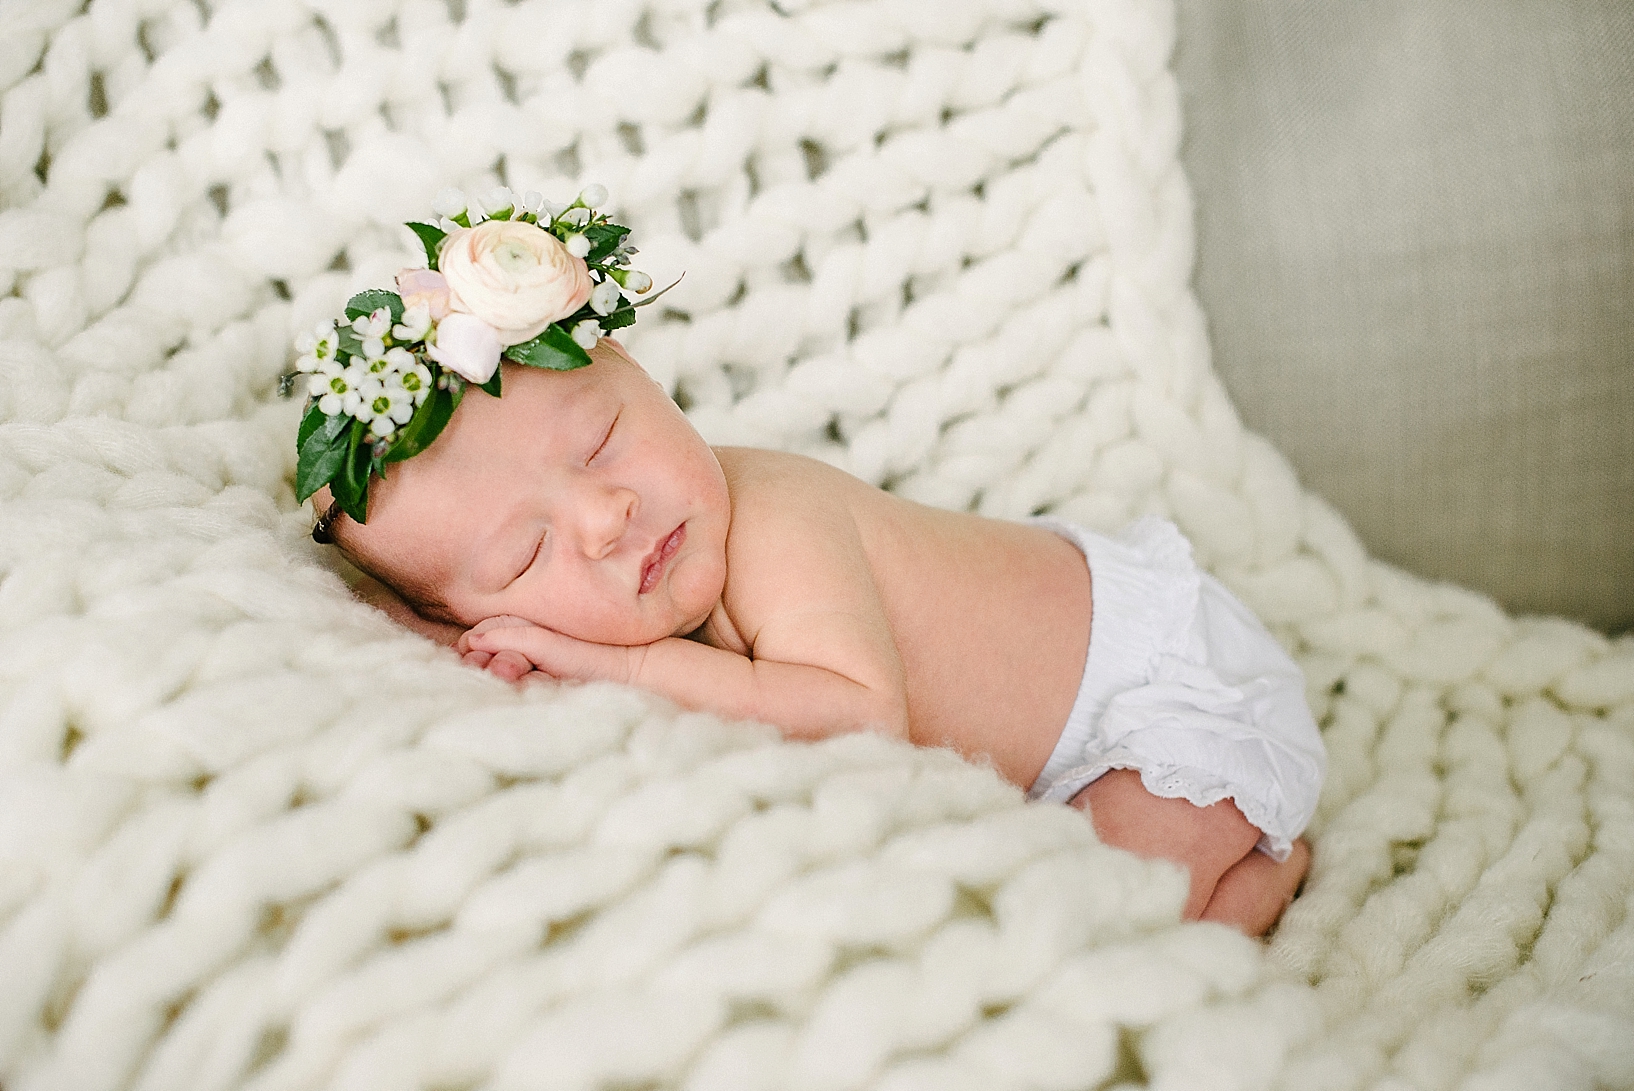 newborn baby girl wearing white bloomers and floral crown laying on cream knit blanket